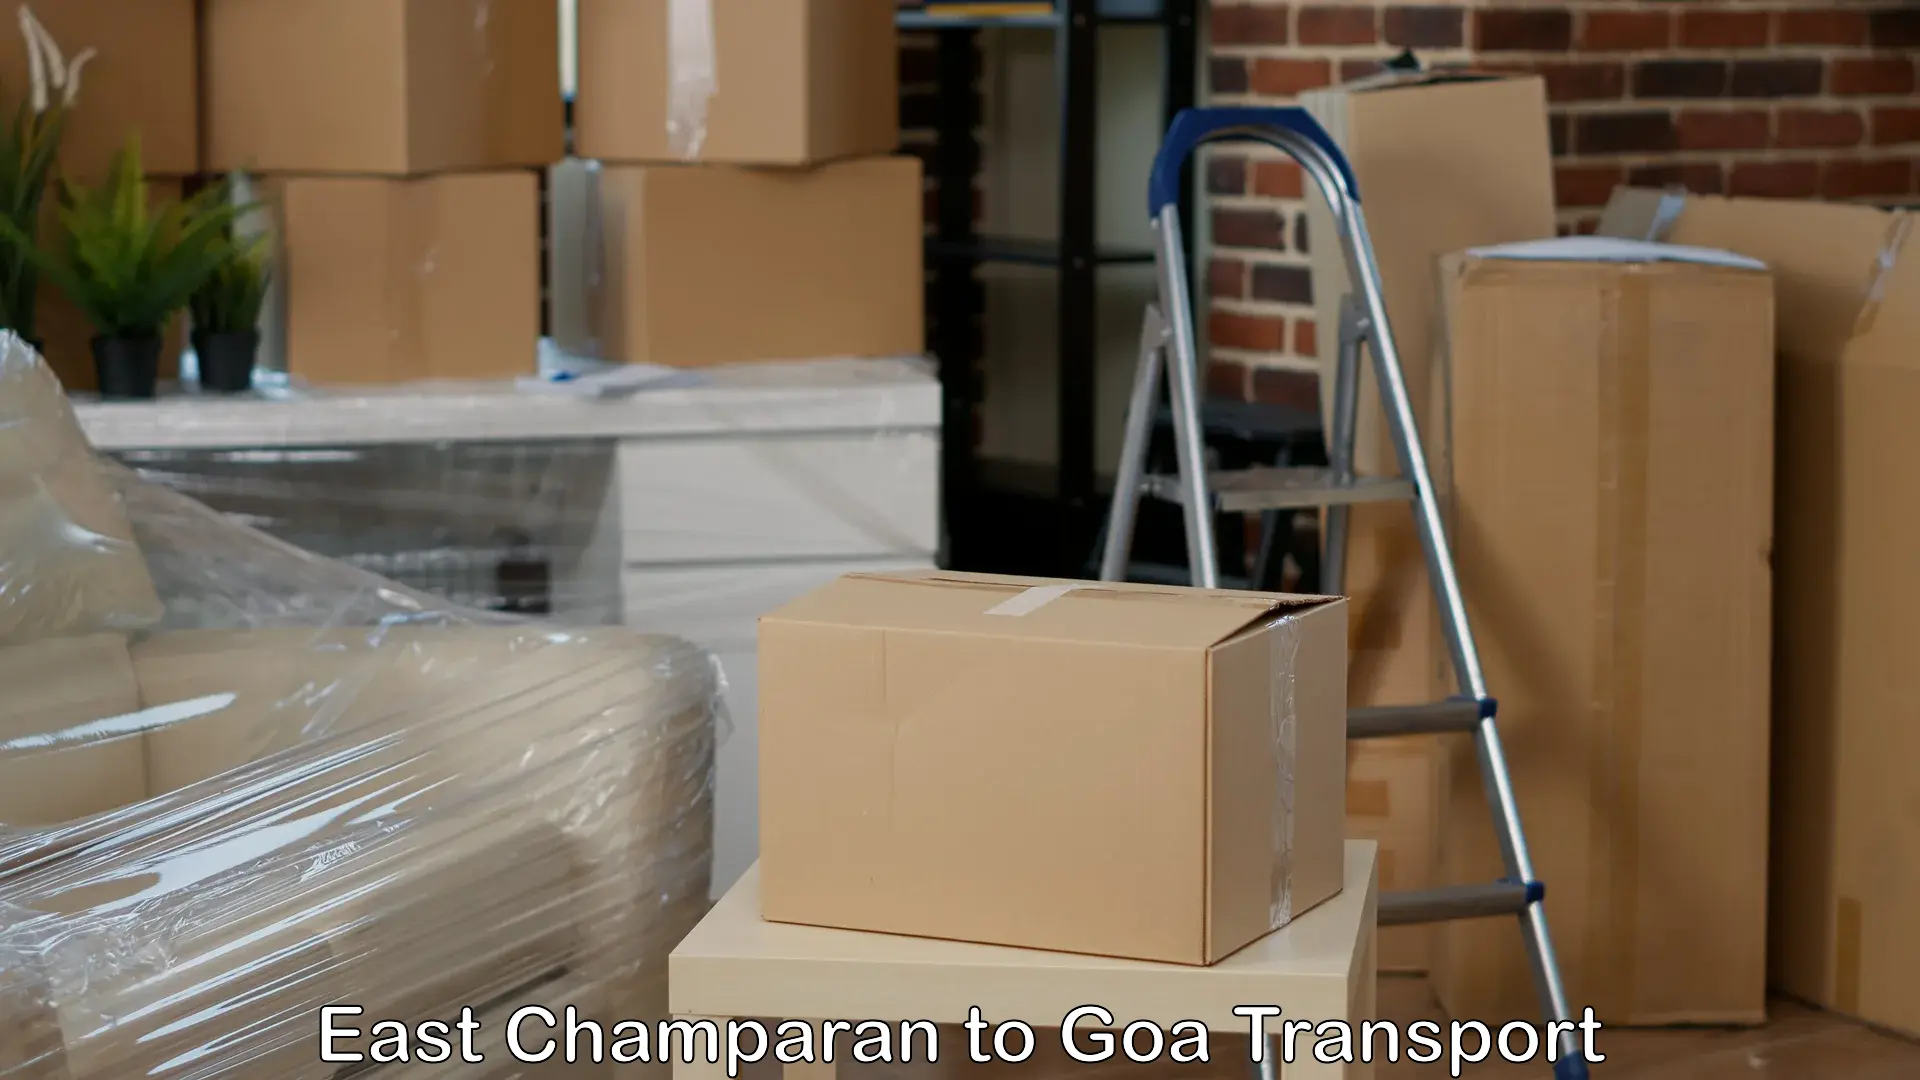 Online transport service East Champaran to Goa